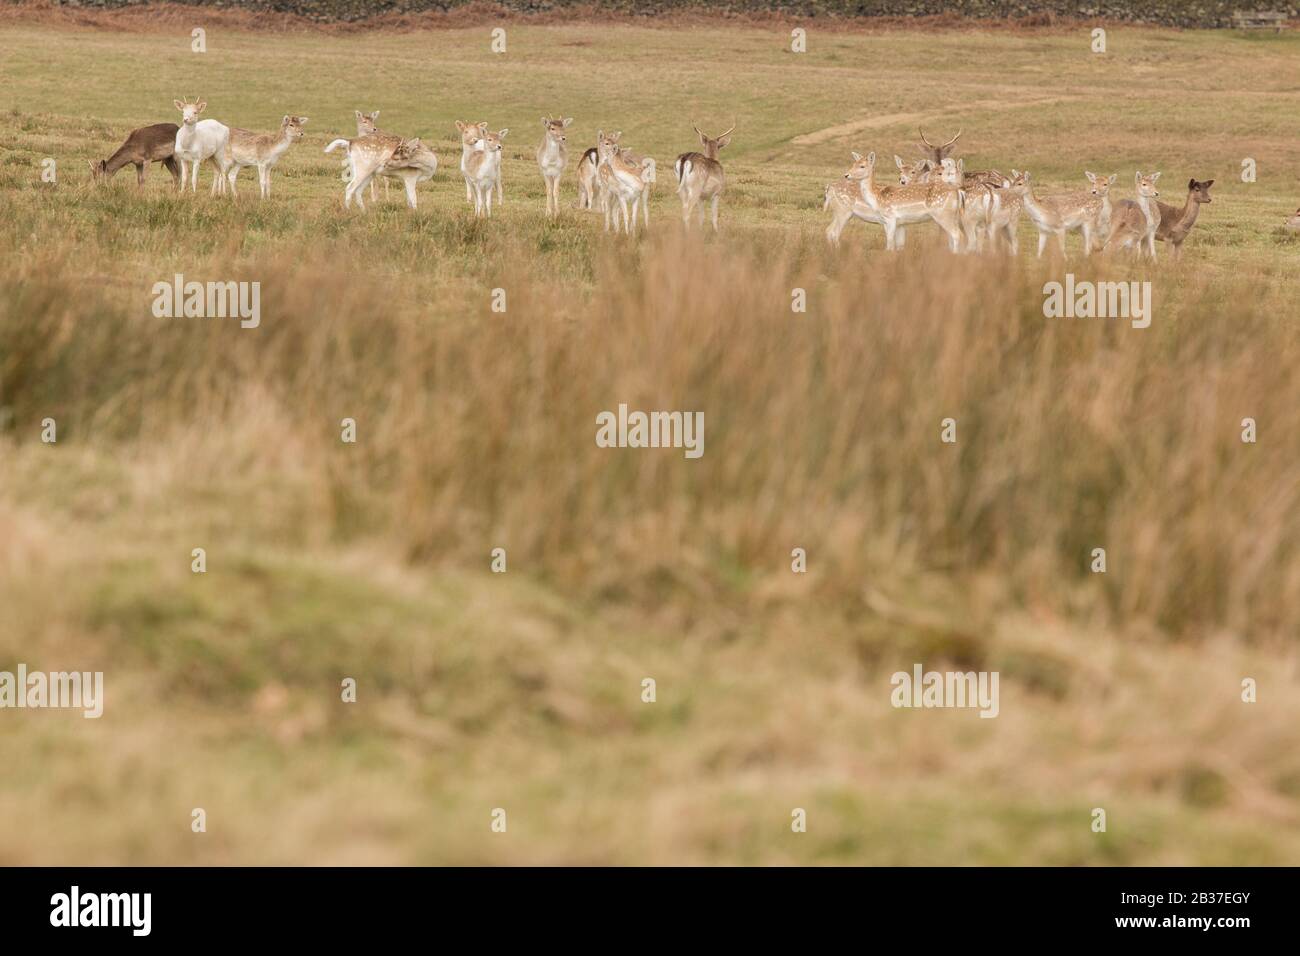 Deer at Bradgate park and walkers (leicestershire) Stock Photo